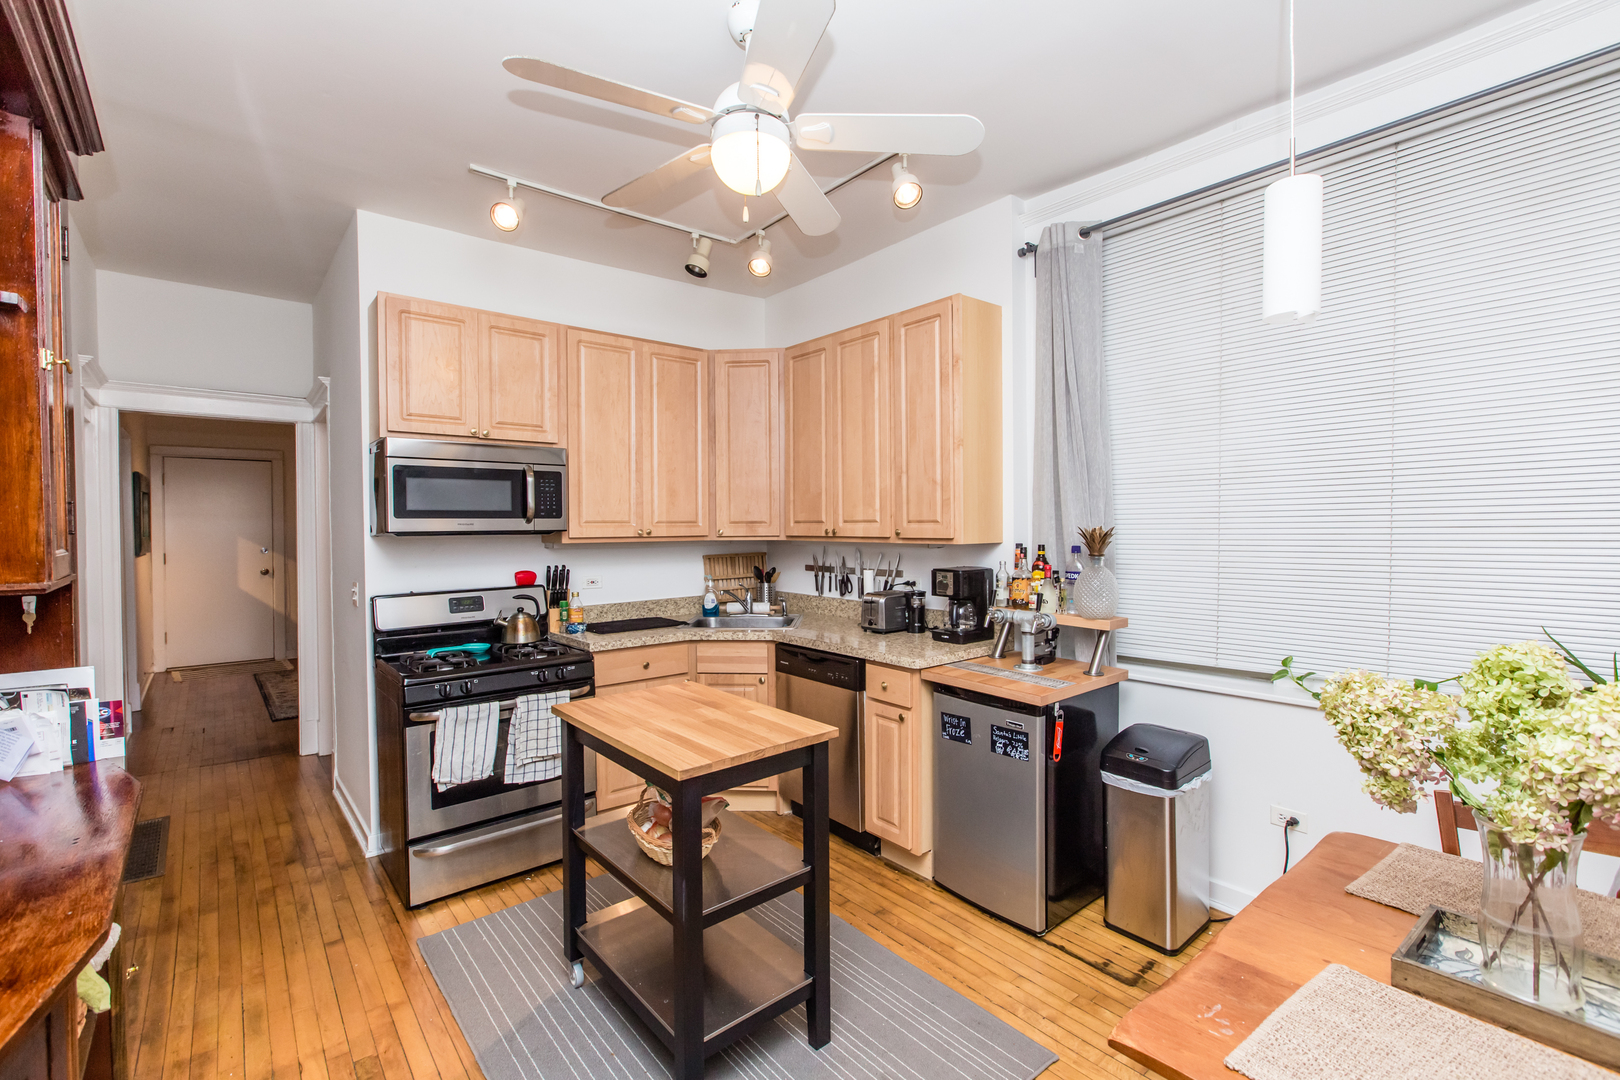 Spacious 2 Bedroom/1 Bath in Hot Wicker Park Location! Central A/C! Stainless Steel Appliances!